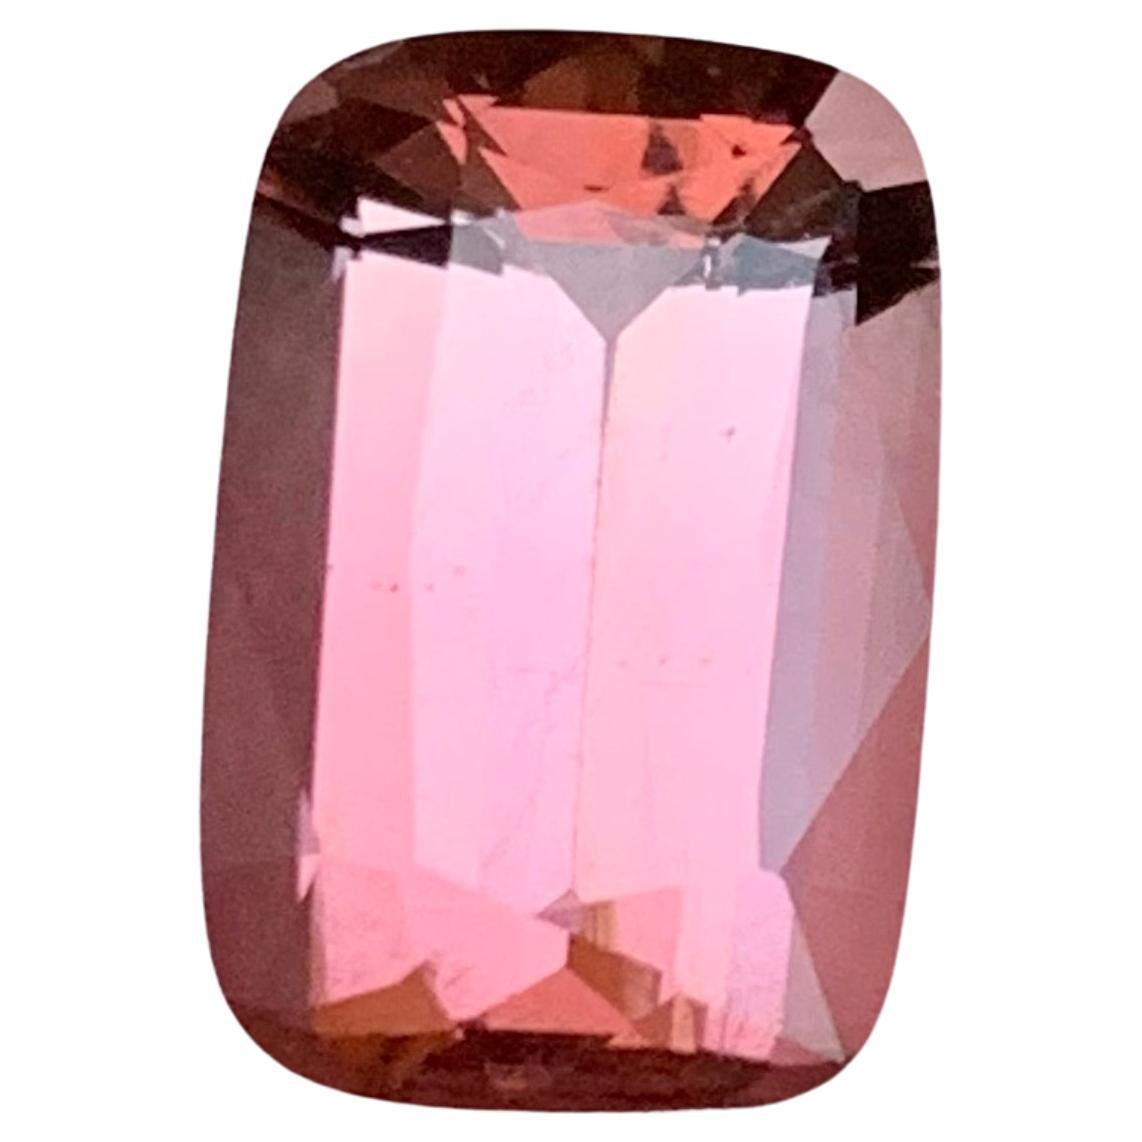 Rare Pink Natural Tourmaline Gemstone 4Ct Brilliant Cushion Cut for Ring/Pendant For Sale